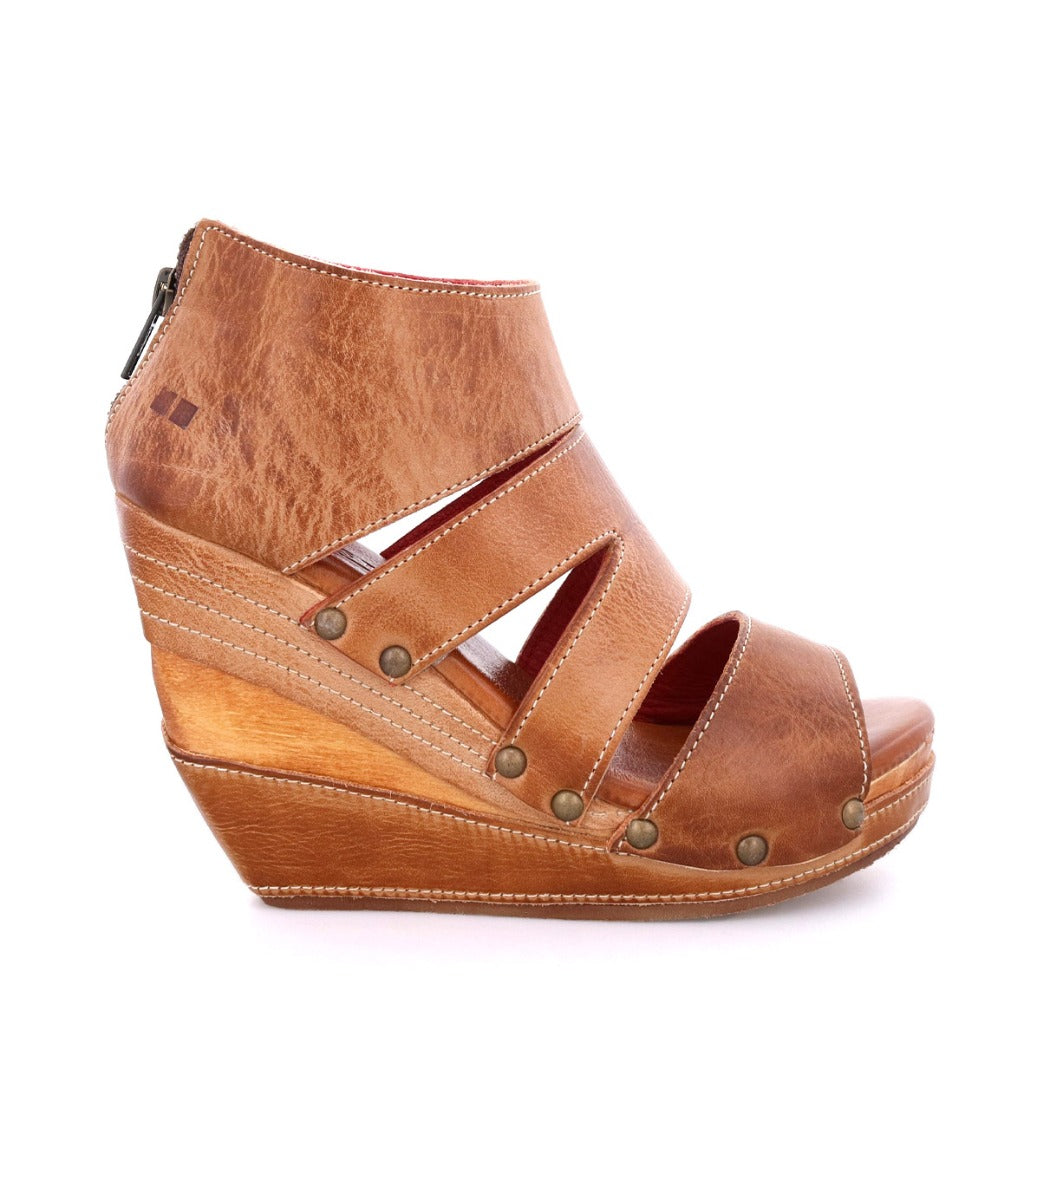 A women's Bed Stu Jacey II tan wedge sandal with wooden wedges.